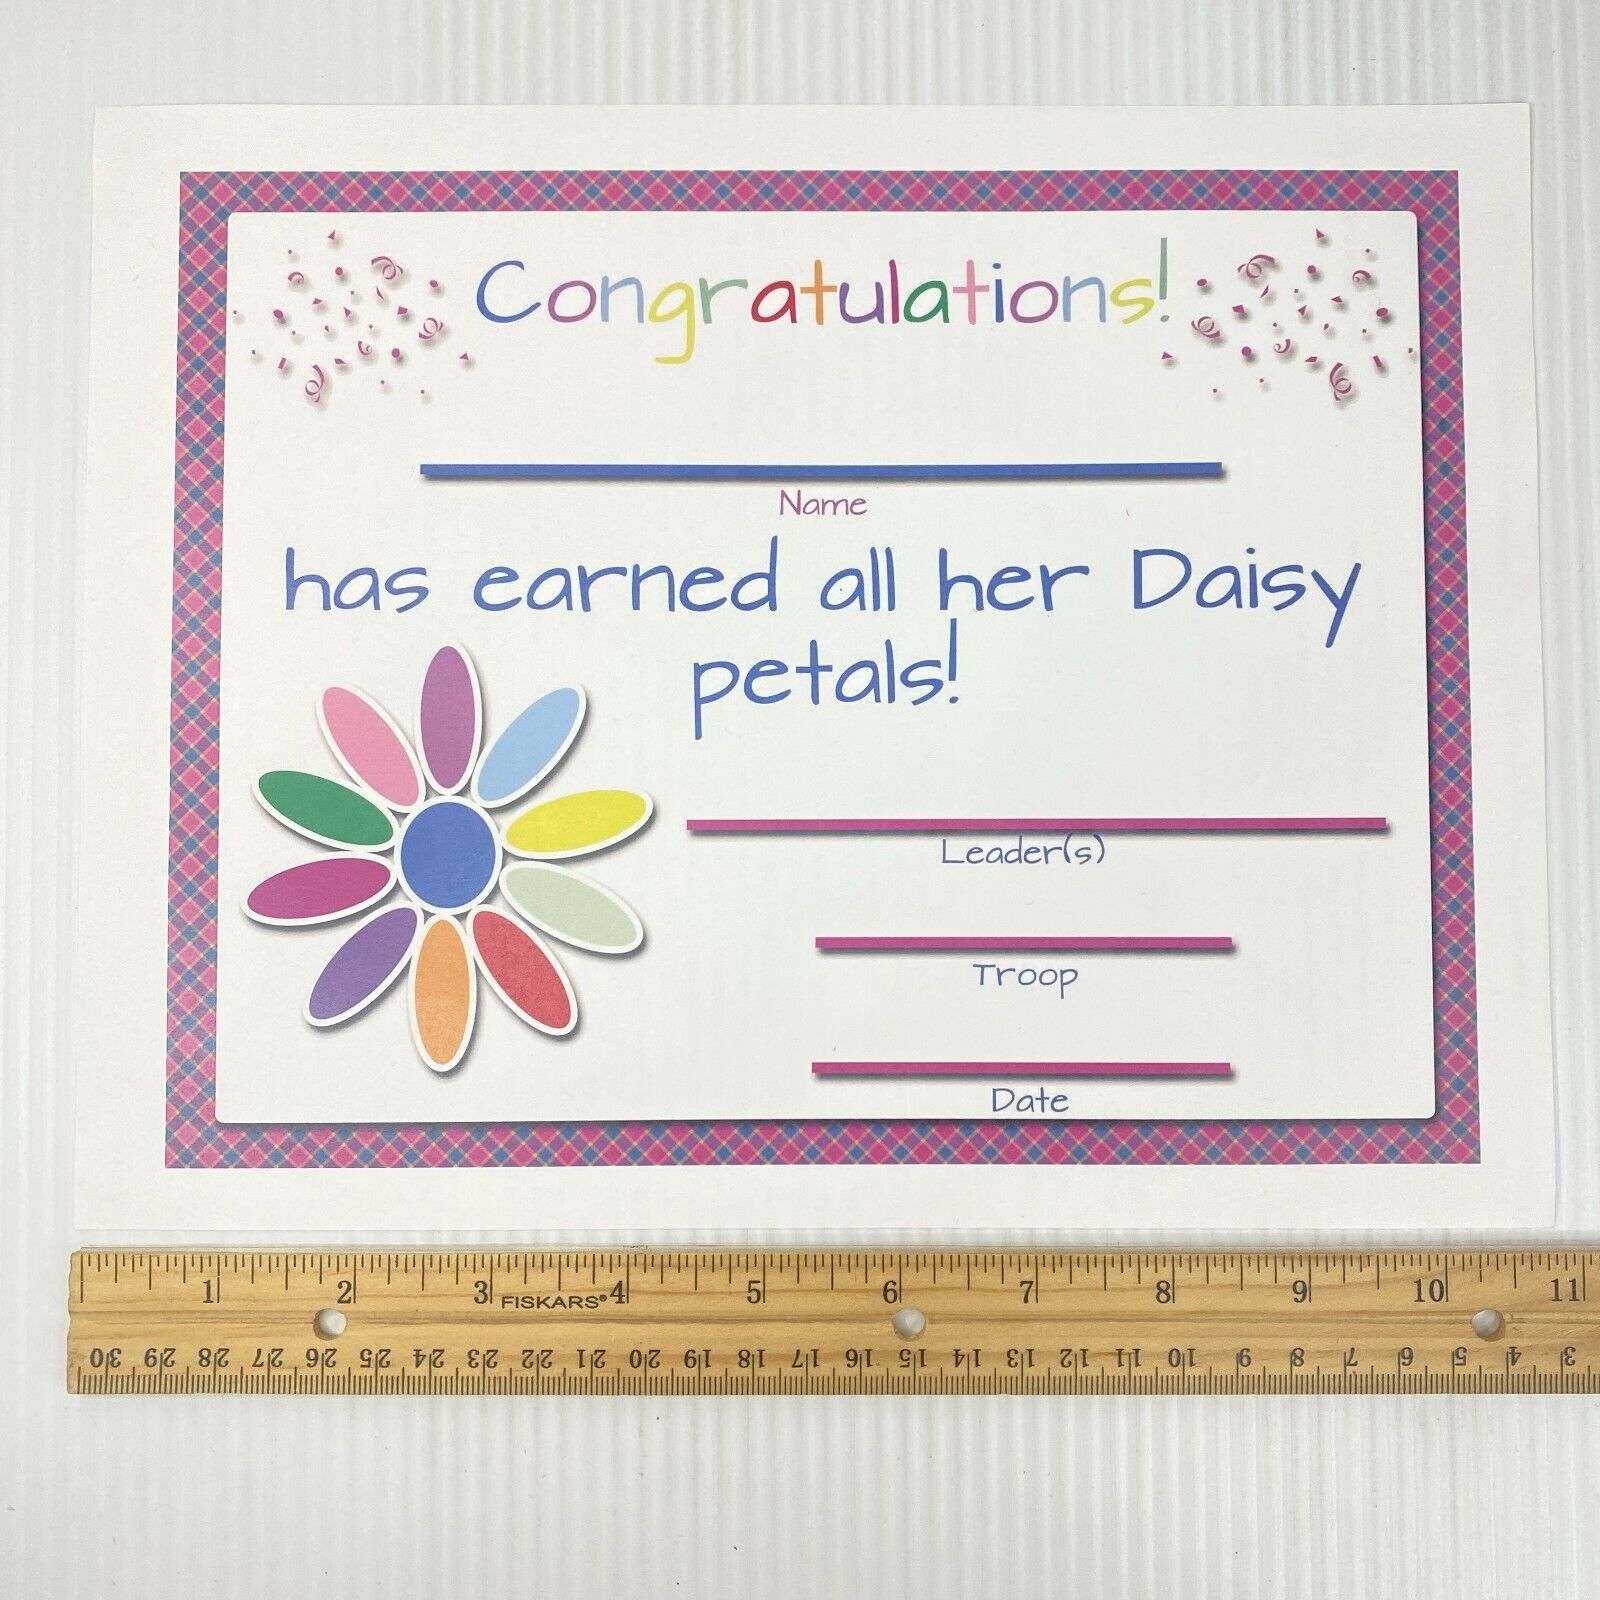 Daisy Girl Scout Petals Certificate Paper Color Print 10in x 8in